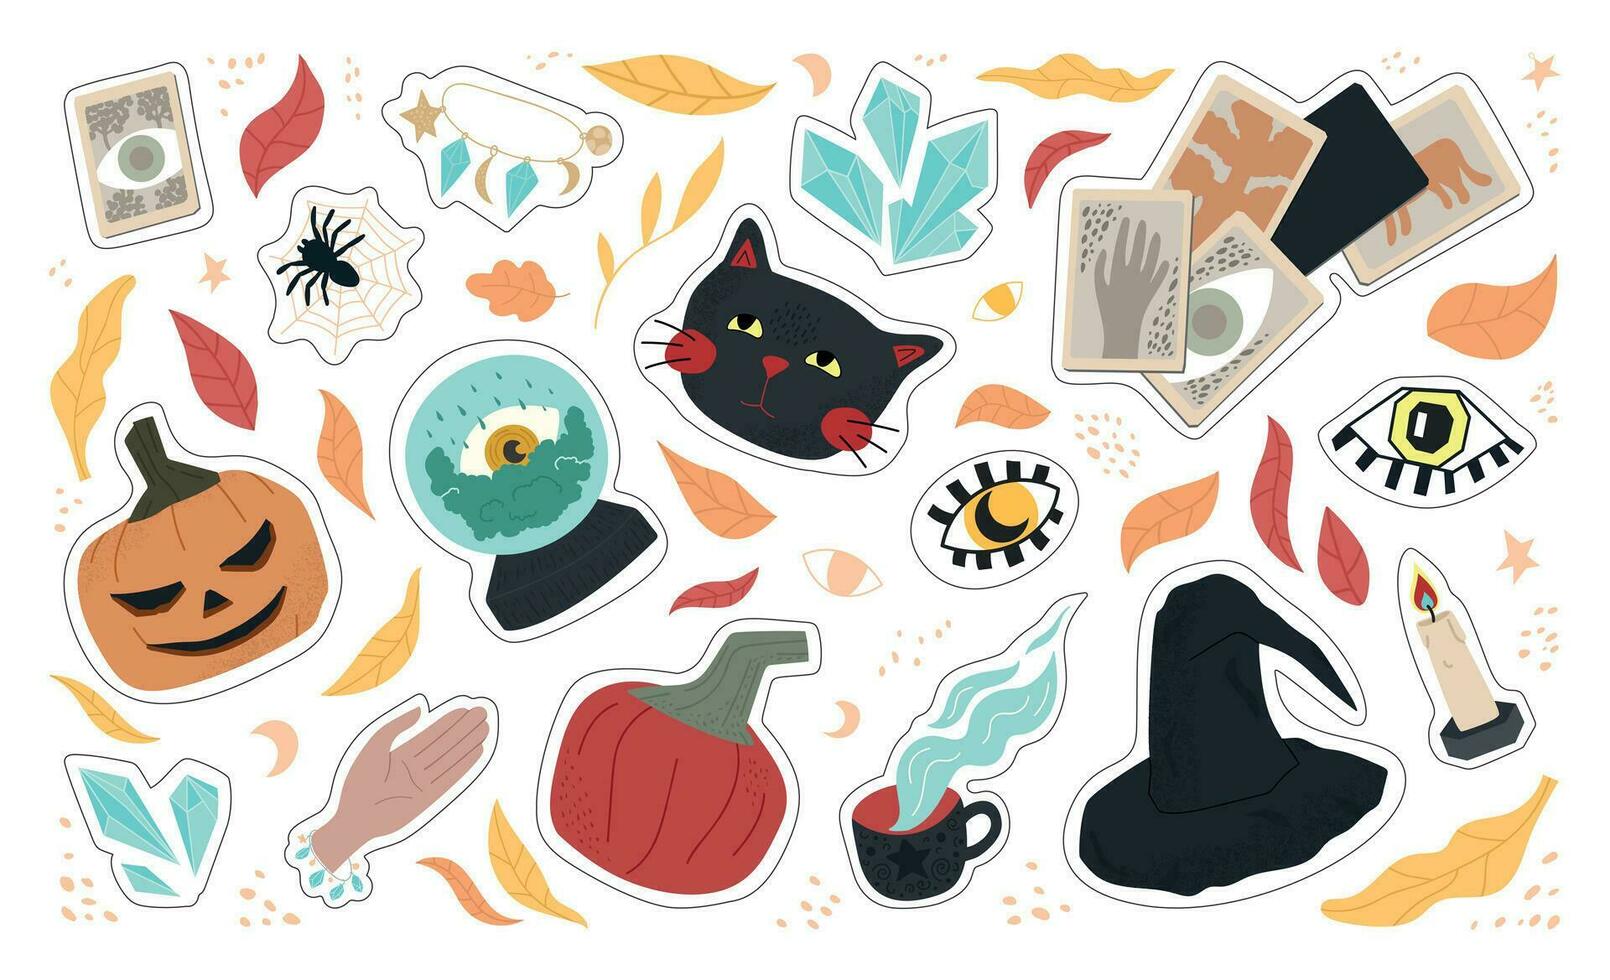 big set of cute Halloween stickers - black cat, eyes, witch hat, pumpkins, spiders, fortune telling ball, cards, crystals, autumn leaves. flat illustration. for a postcard, poster or any design. vector